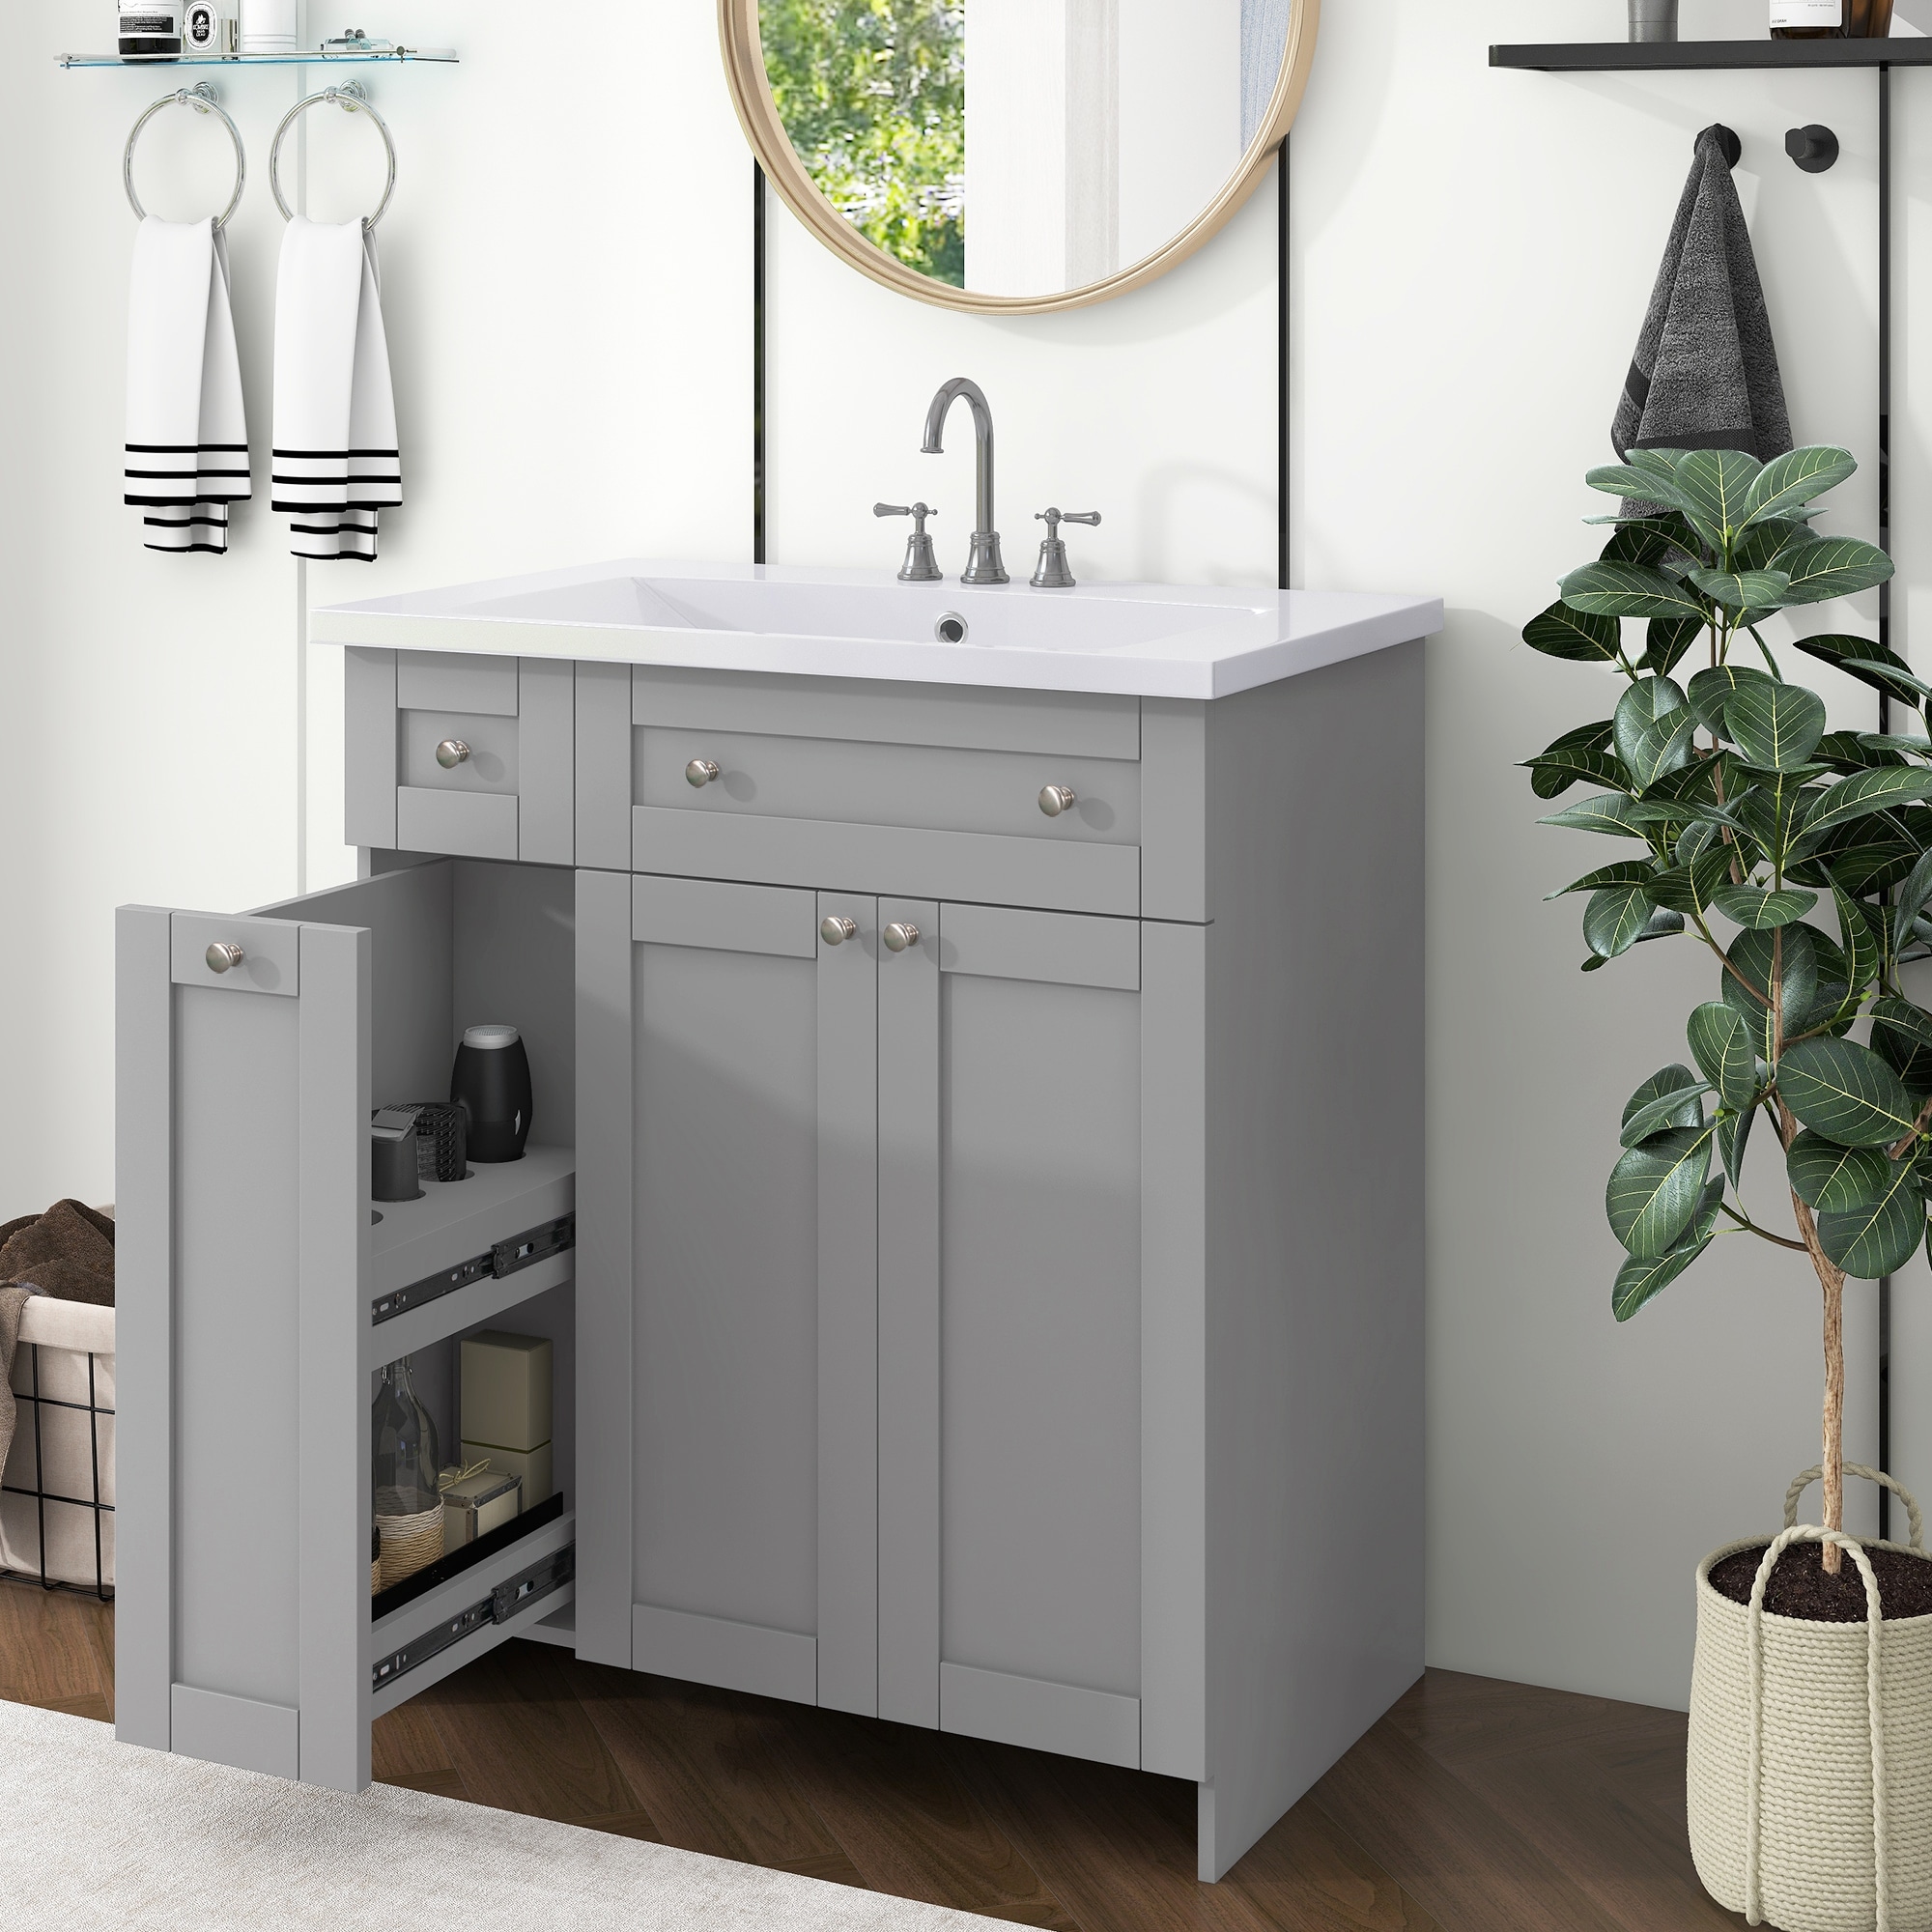 https://ak1.ostkcdn.com/images/products/is/images/direct/9ab228844a46c8241304c1b332bf691f15a55291/30%22-Bathroom-vanity-with-Single-Sink-Combo-Cabinet-Undermount-Sink%2CBathroom-Storage-Cabinet%2CSolid-Wood-Frame.jpg